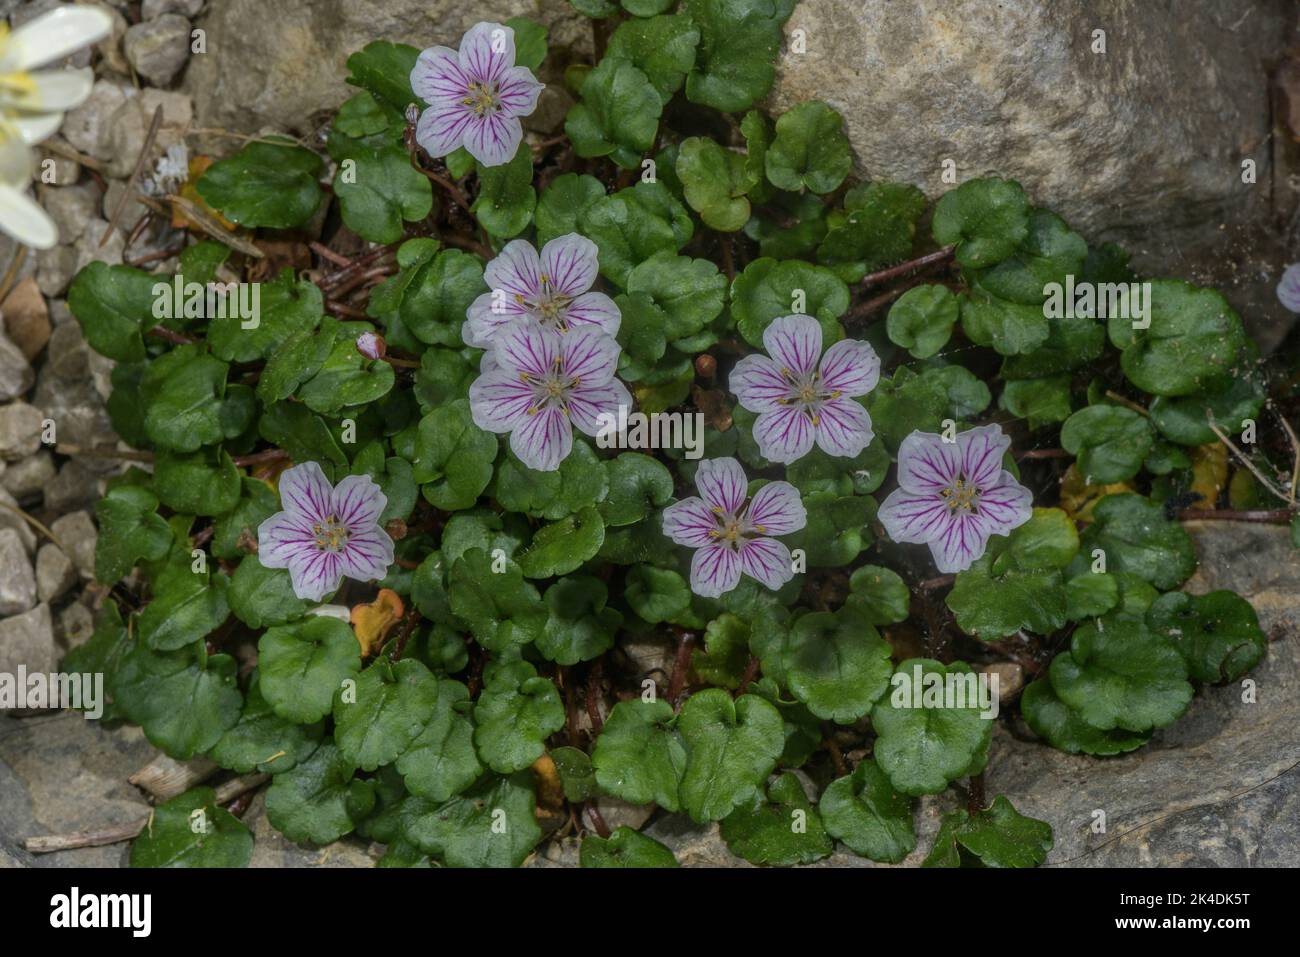 A Storksbill, Erodium reichardii, endemic to the Balearic Islands, Spain. . Stock Photo